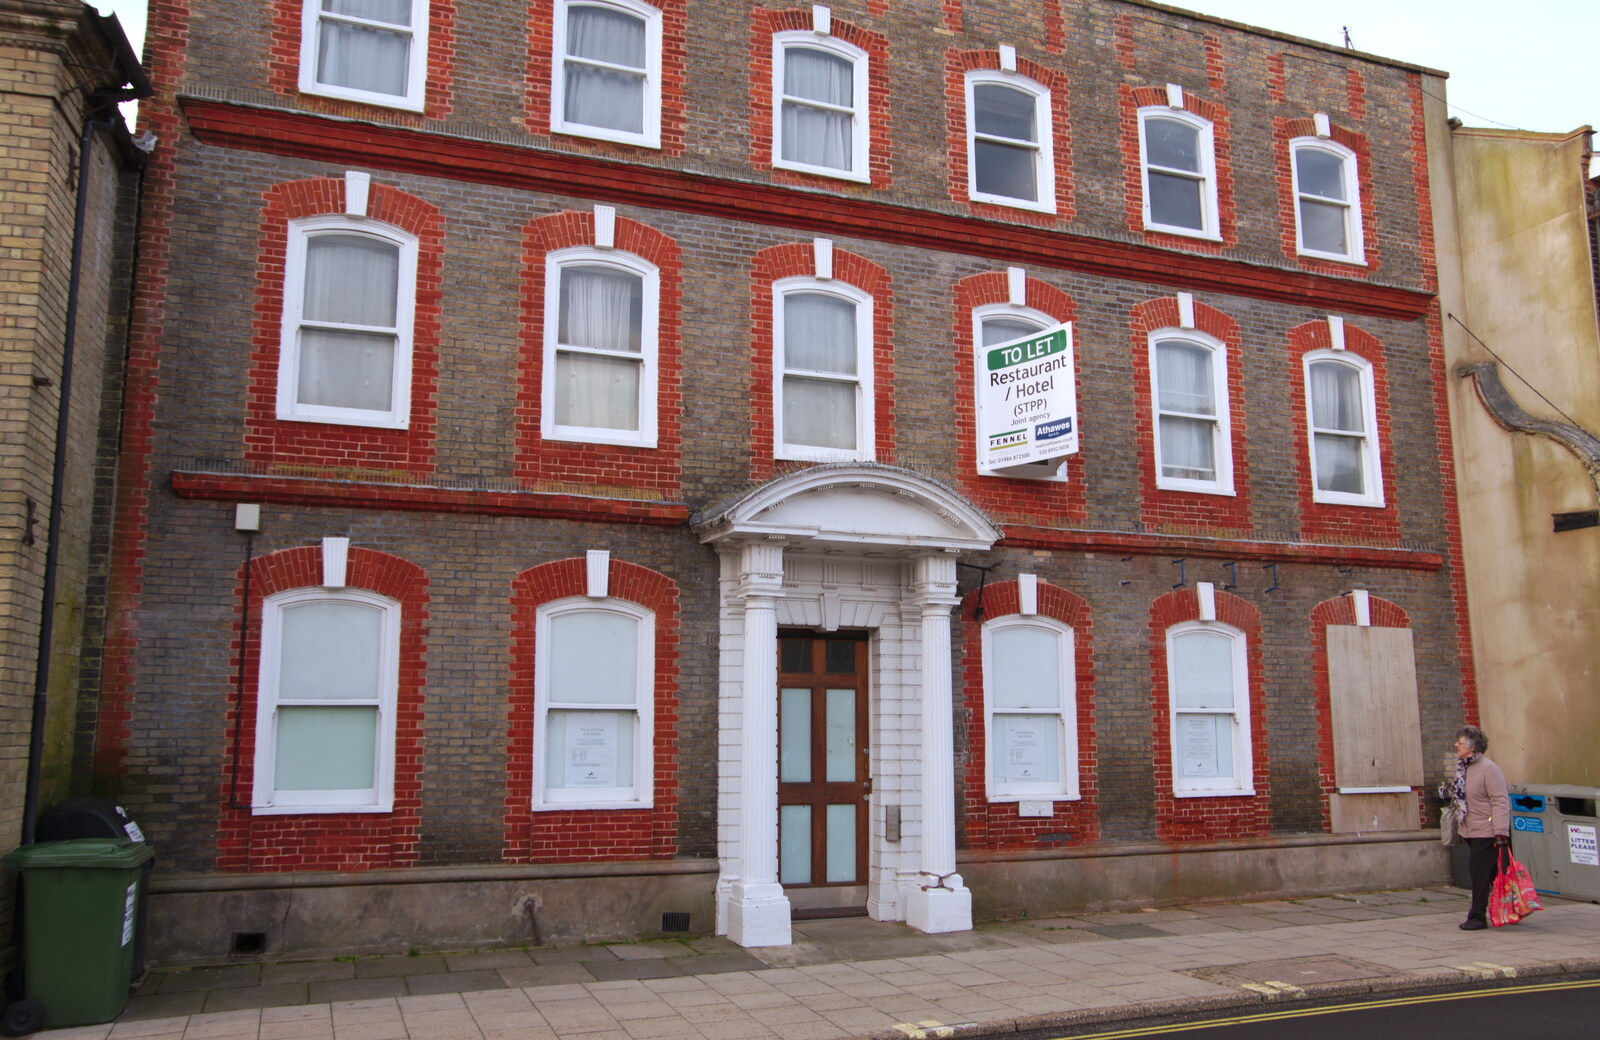 The former Lloyds Bank would make a good hotel from A Night at the Crown Hotel, Southwold, Suffolk - 8th November 2019